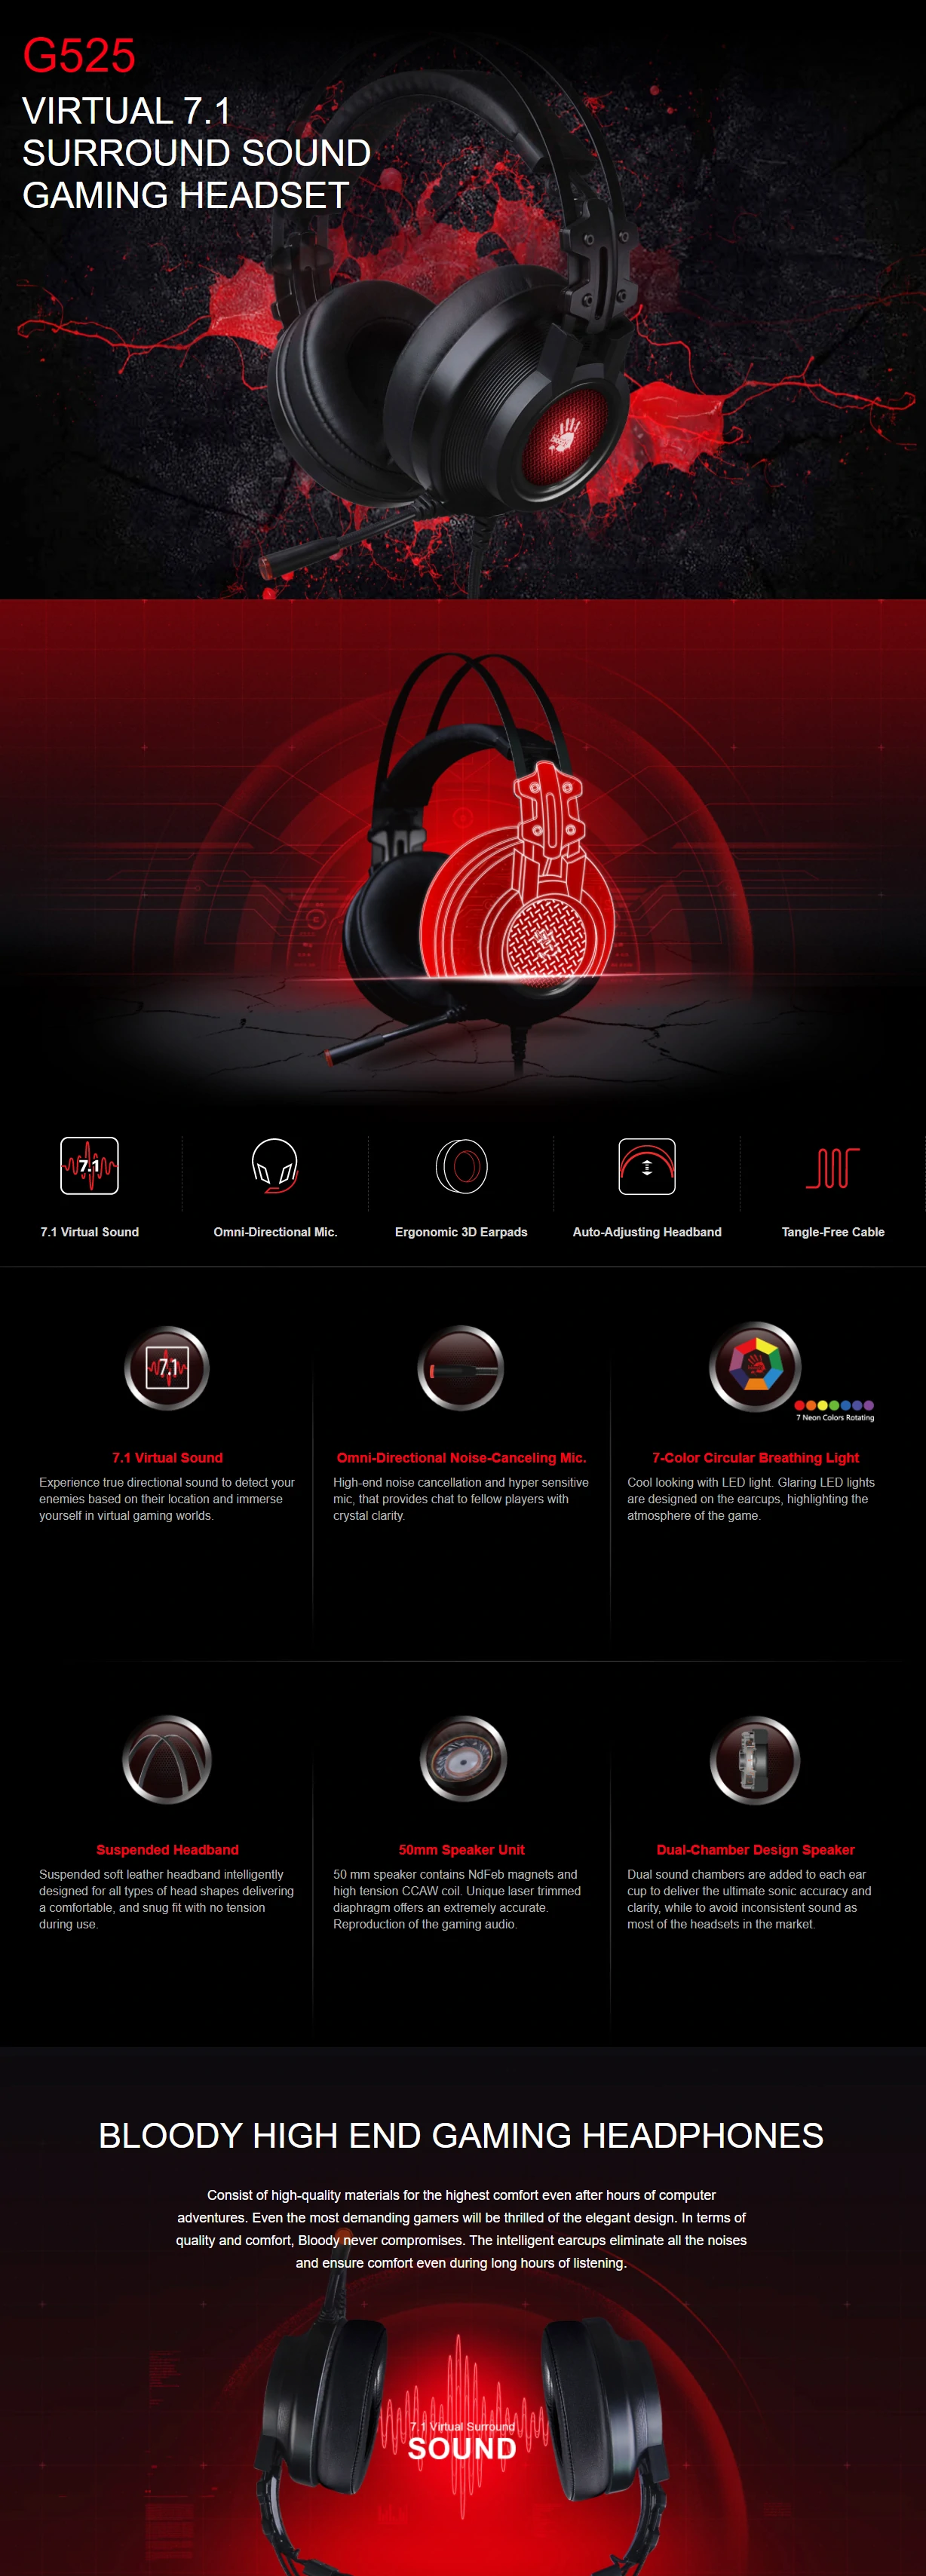 Overview - Bloody - G525 Virtual 7.1 Surround Sound Gaming Headset